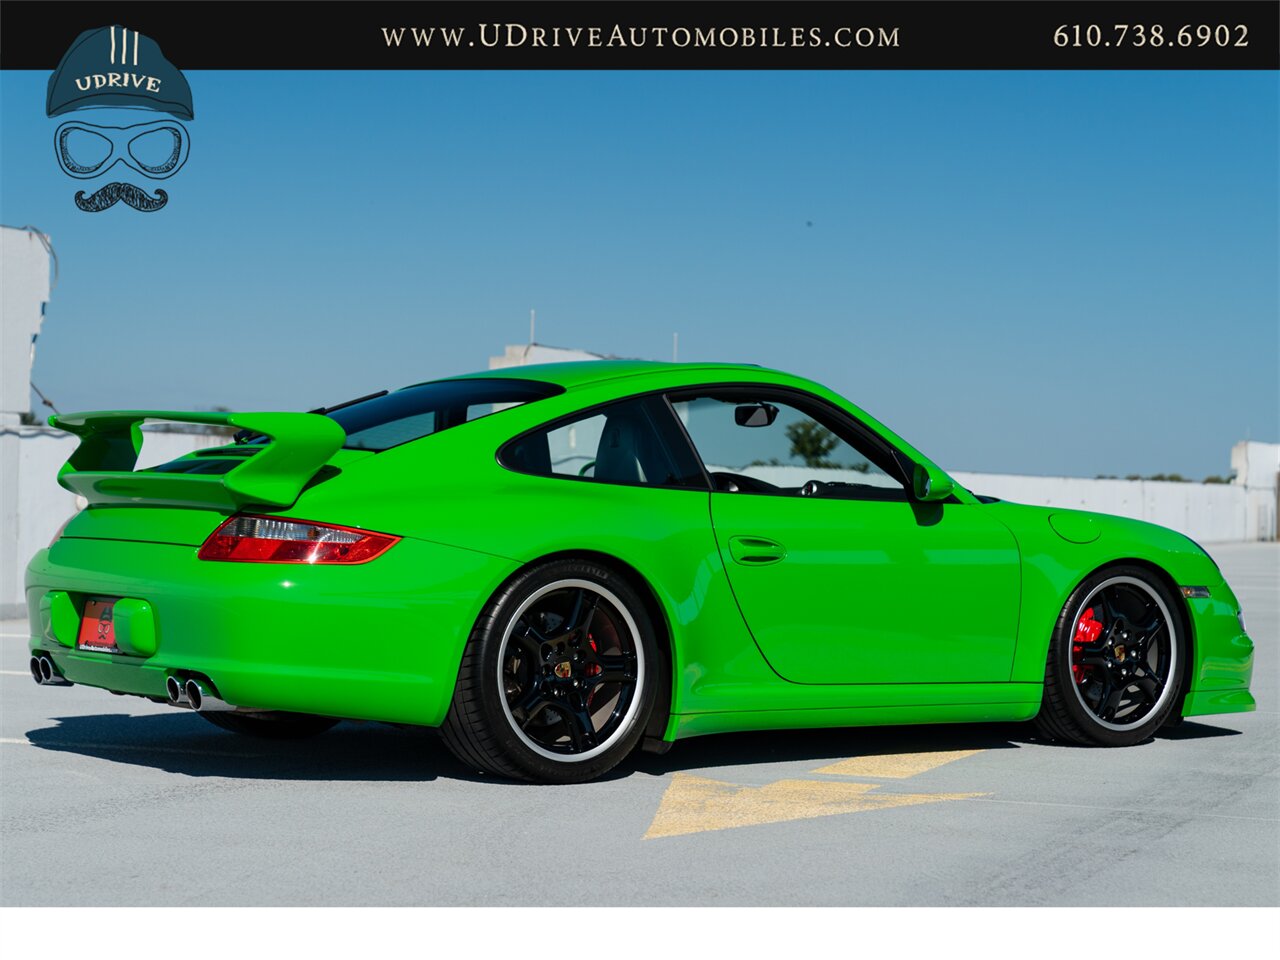 2006 Porsche 911 Carrera 4S  997 PTS Signal Green 6Sp Sport Sts Spt Chrono Spt Exhst - Photo 21 - West Chester, PA 19382